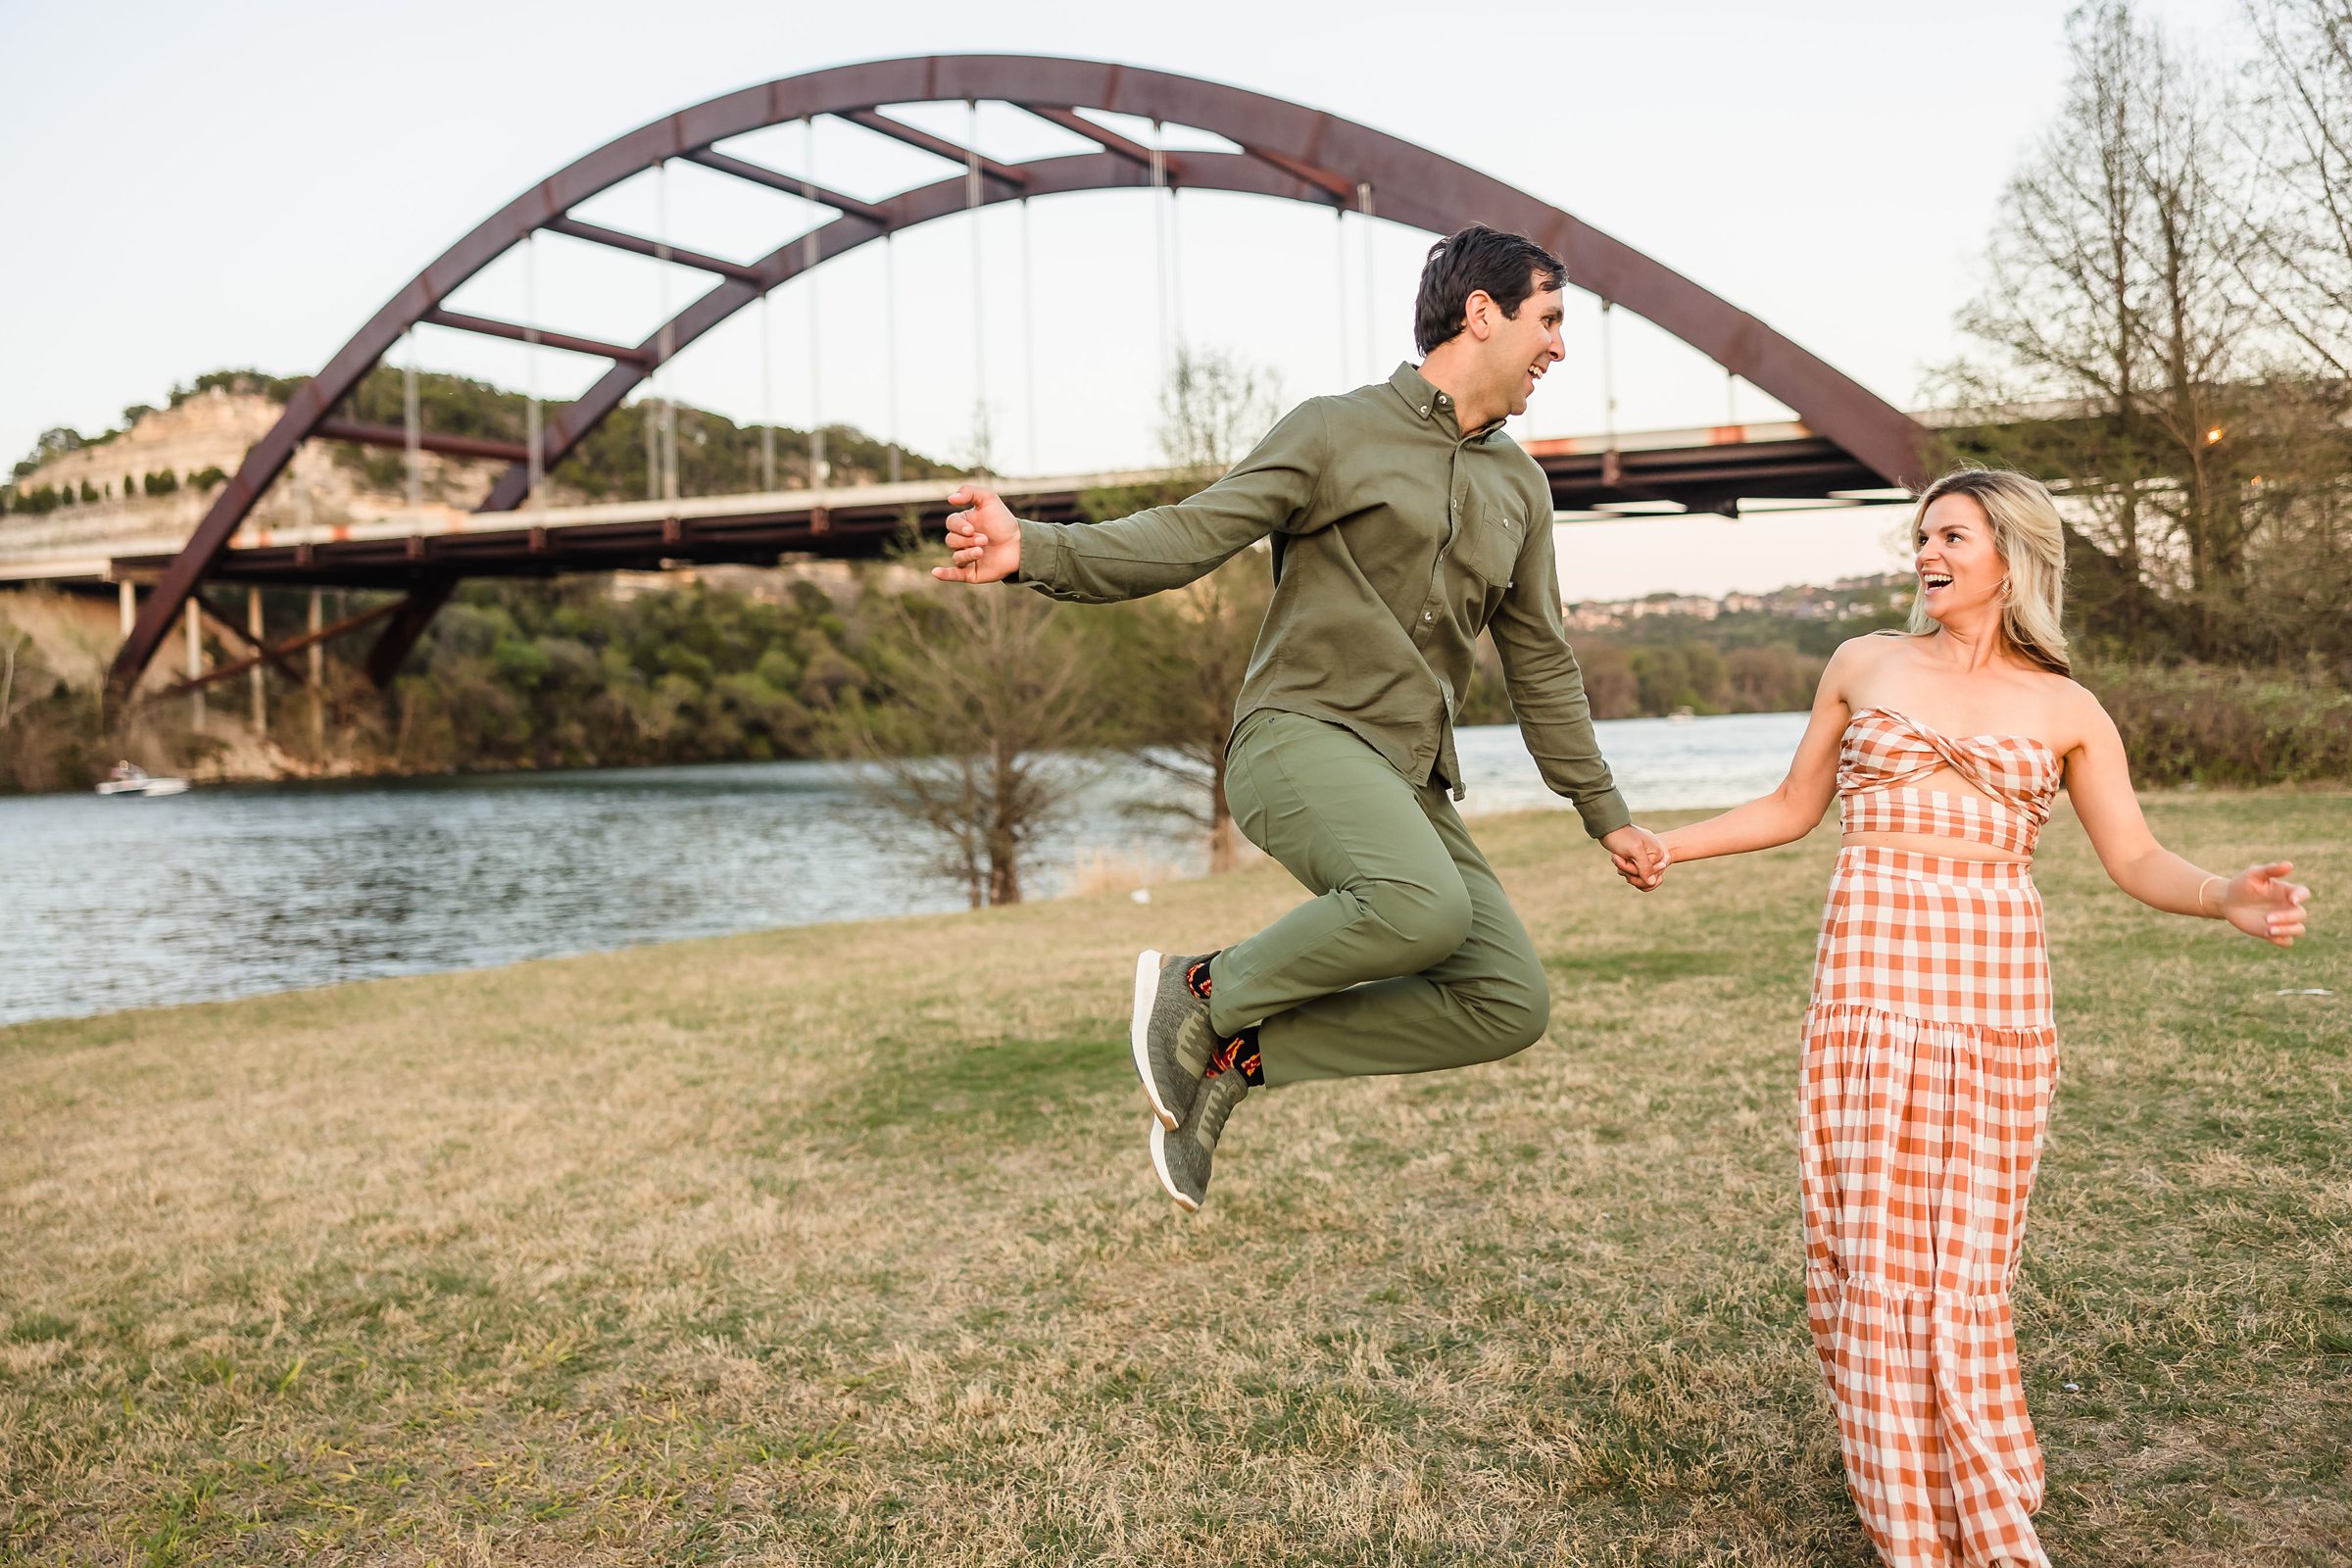 Couple jump together during their engagement session at the 360 Bridge in Austin, Texas.